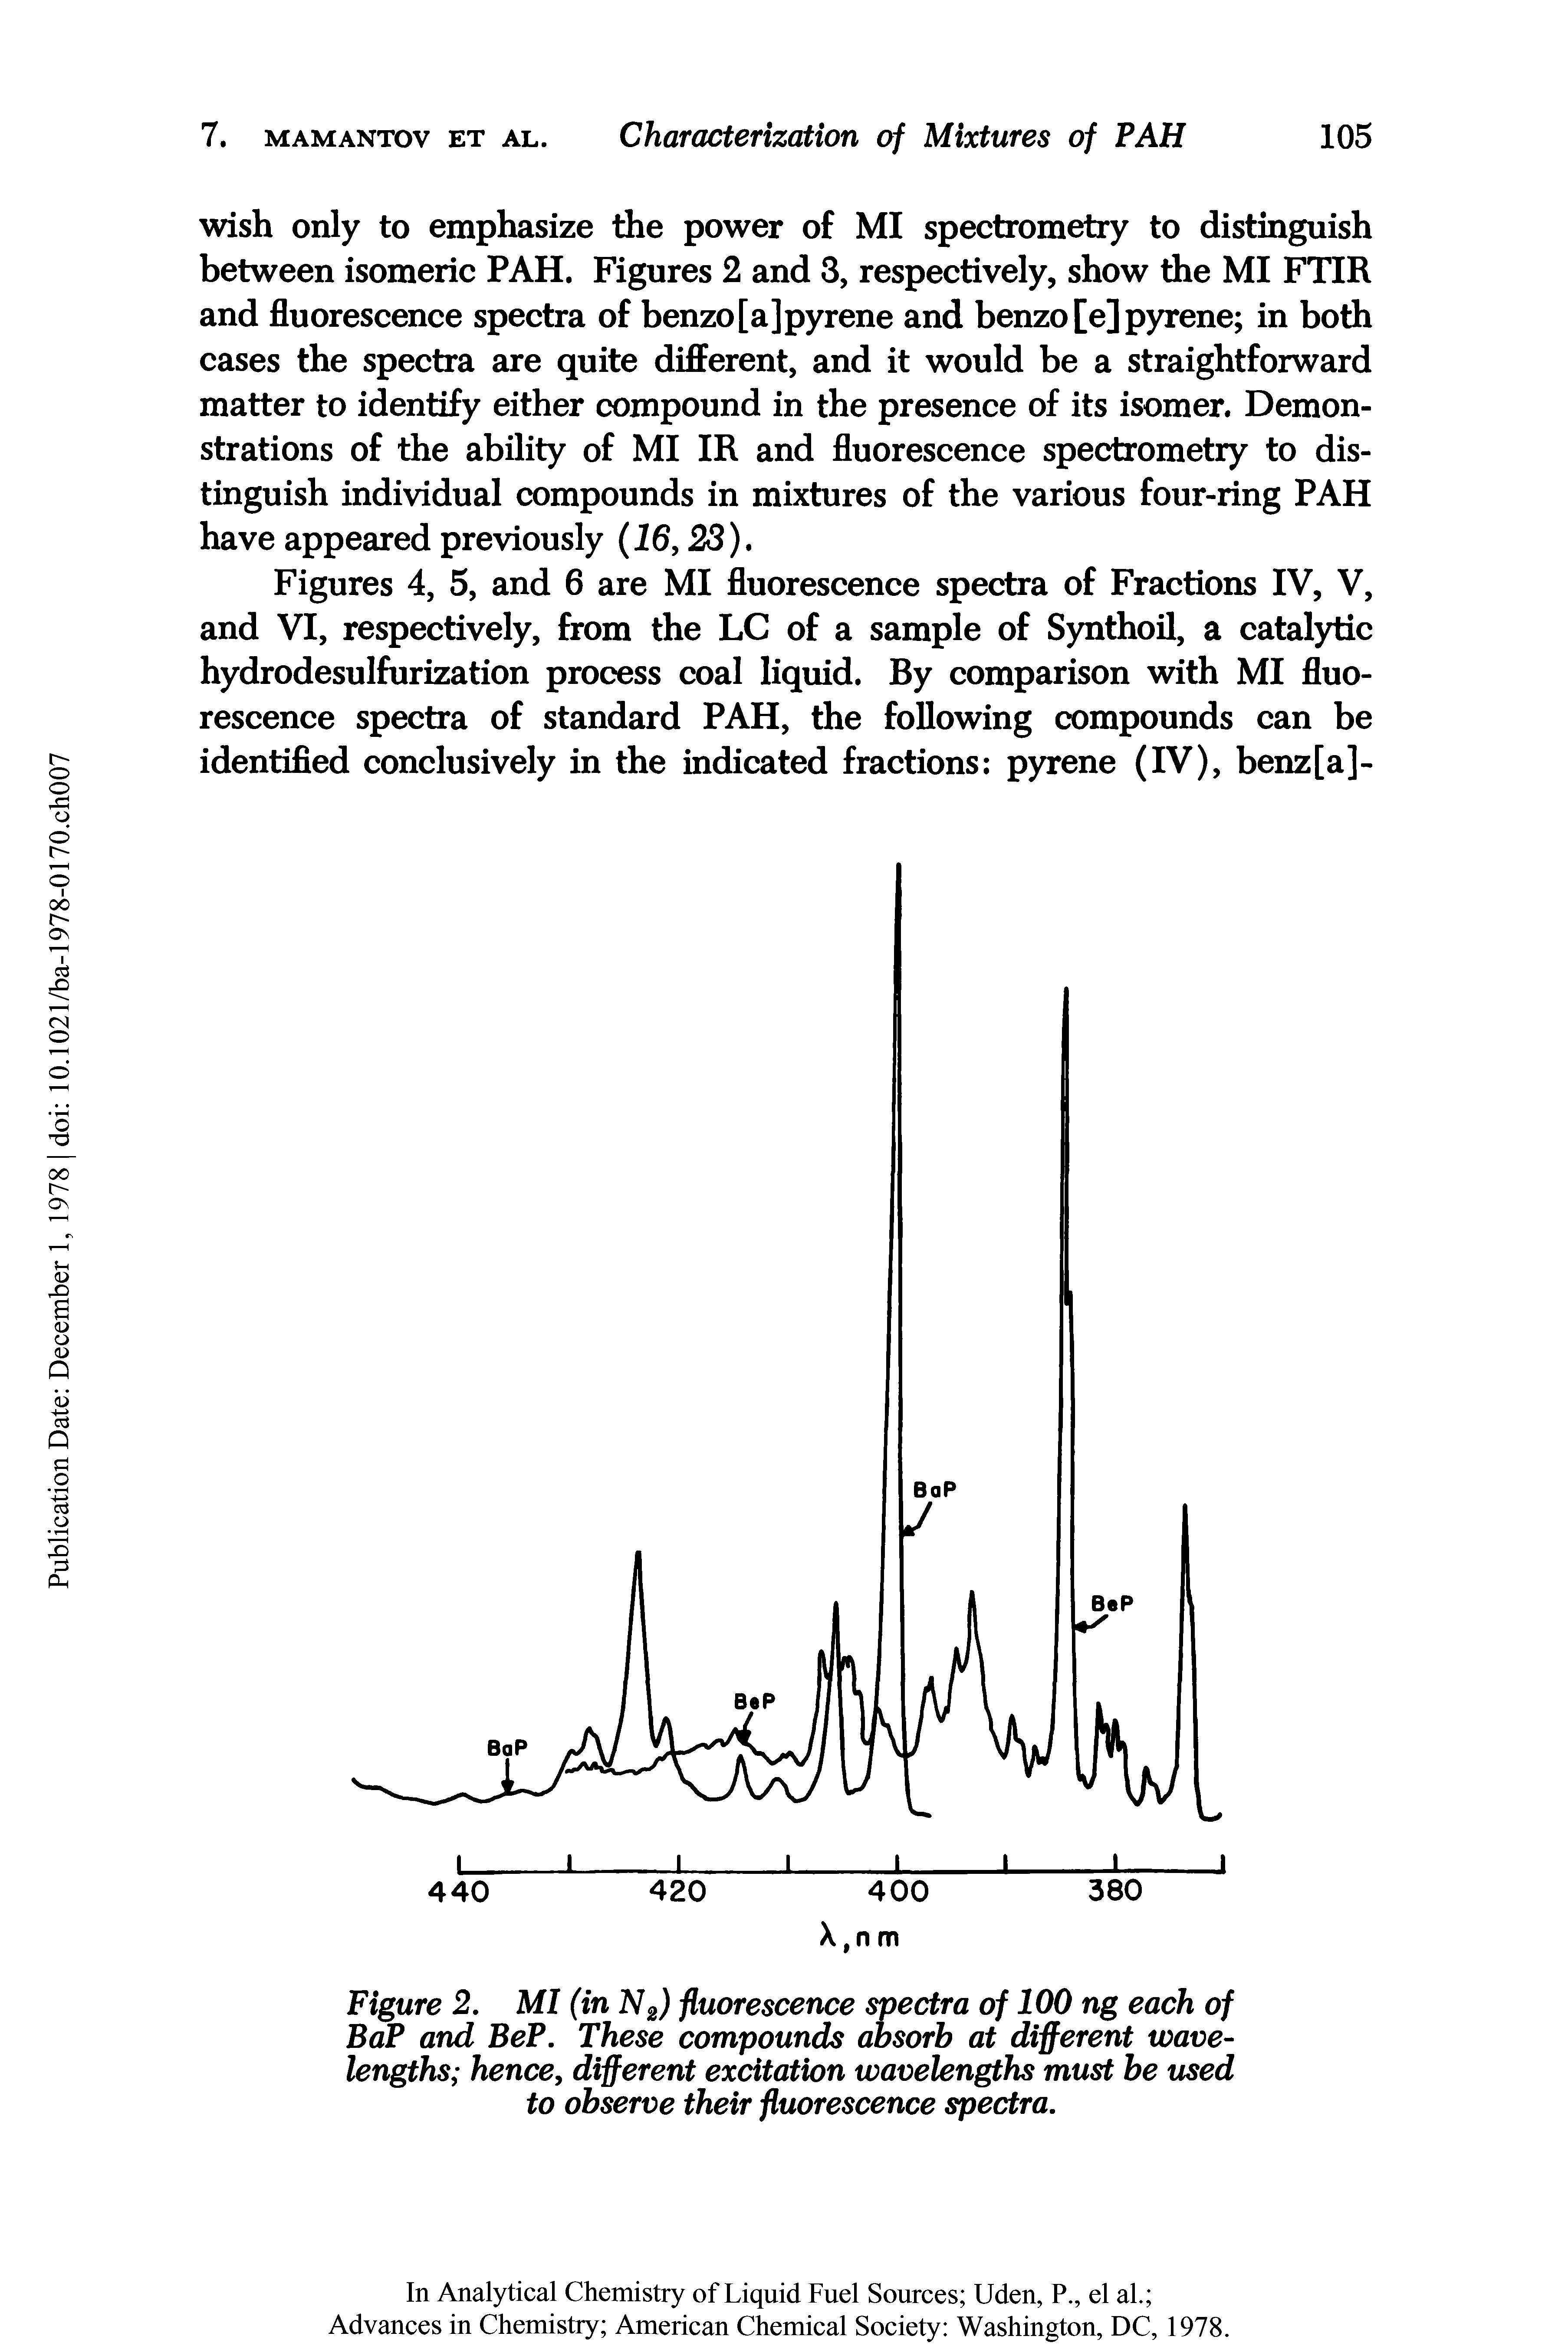 Figures 4, 5, and 6 are MI fluorescence spectra of Fractions IV, V, and VI, respectively, from the LC of a sample of Synthoil, a catalytic hydrodesulfurization process coal liquid. By comparison with MI fluorescence spectra of standard PAH, the following compounds can be identified conclusively in the indicated fractions pyrene (IV), benz[a]-...